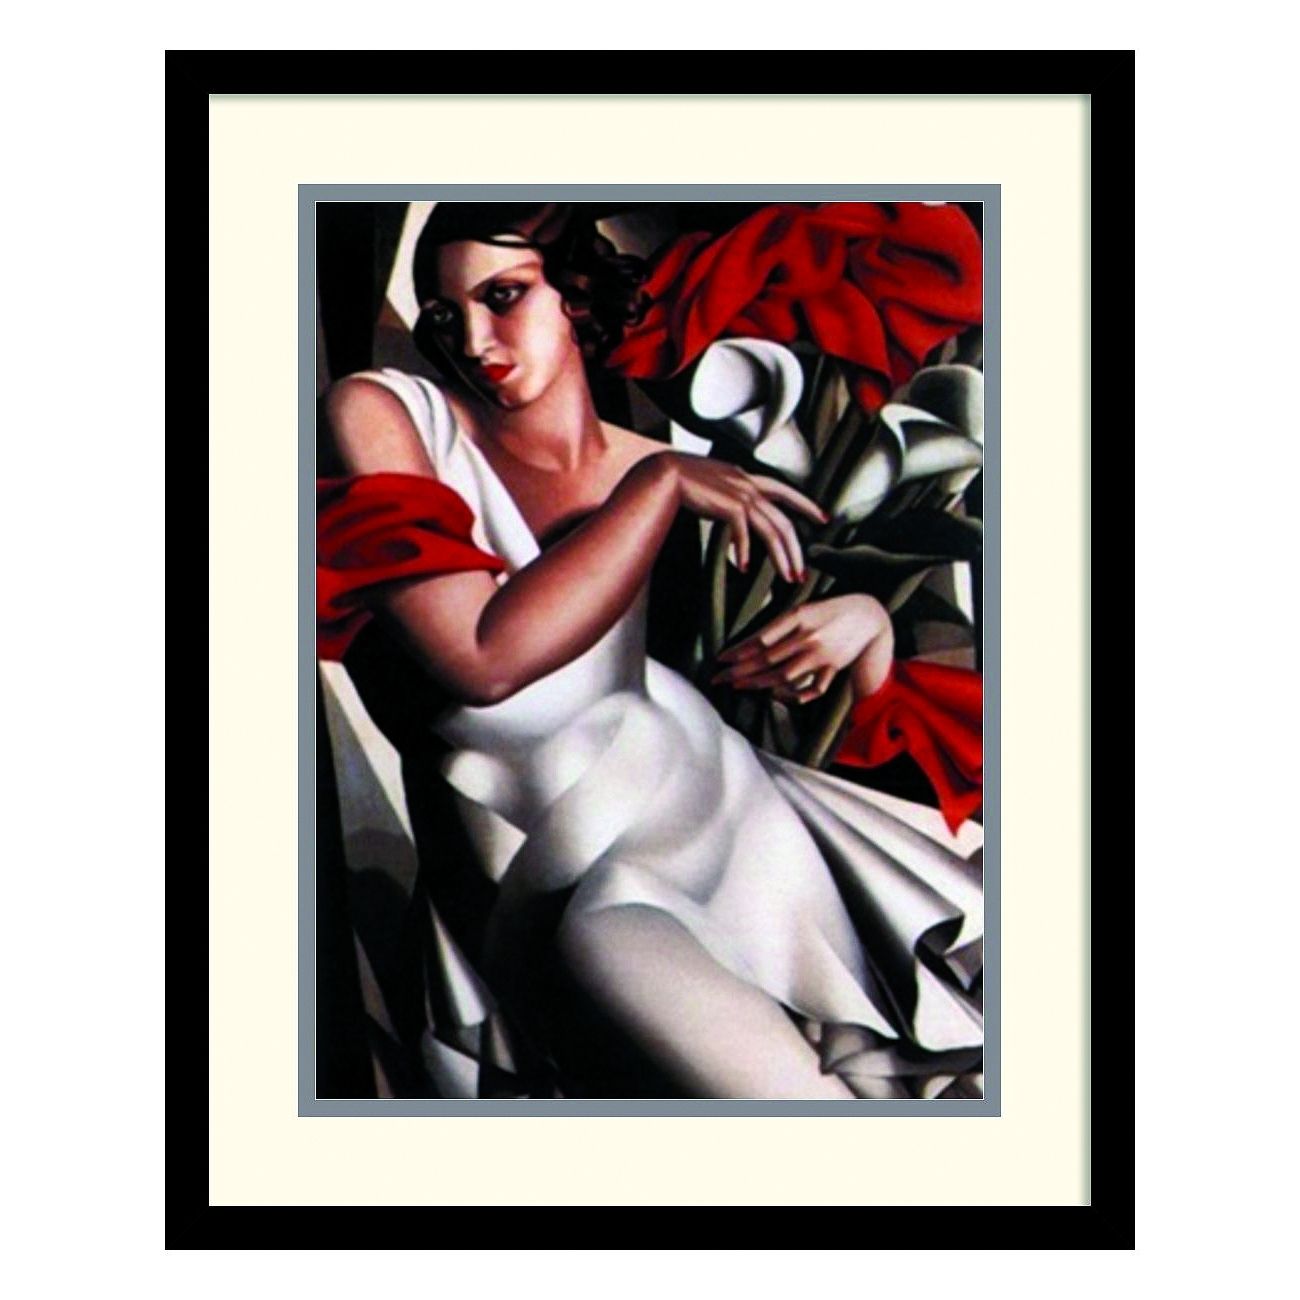 Framed Art Deco Prints Within Recent Period Design Series: All About Art Deco (View 2 of 15)